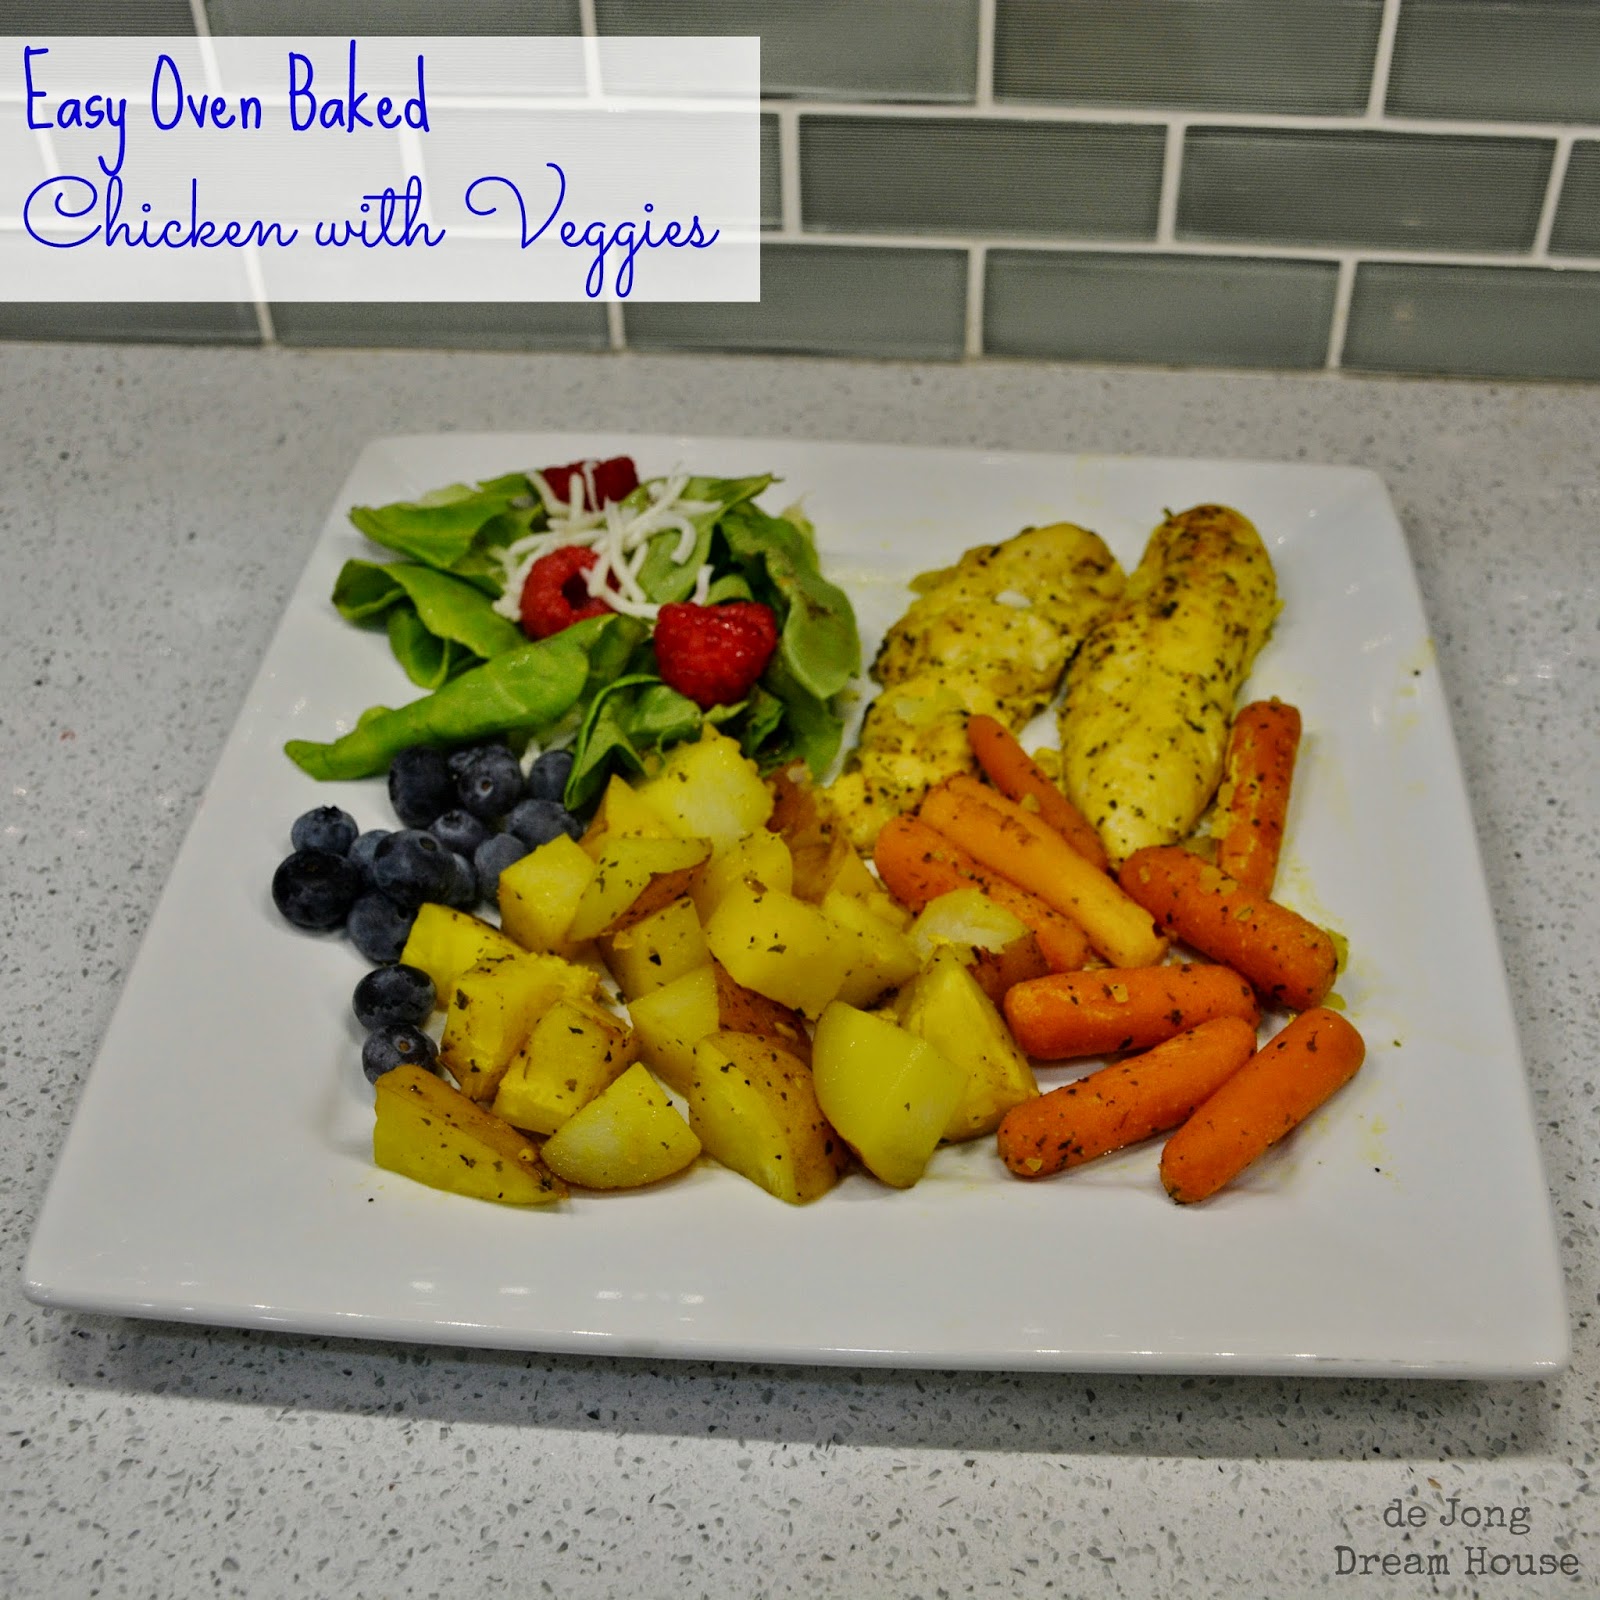 Easy Oven Baked Chicken with Veggies by de Jong Dream House